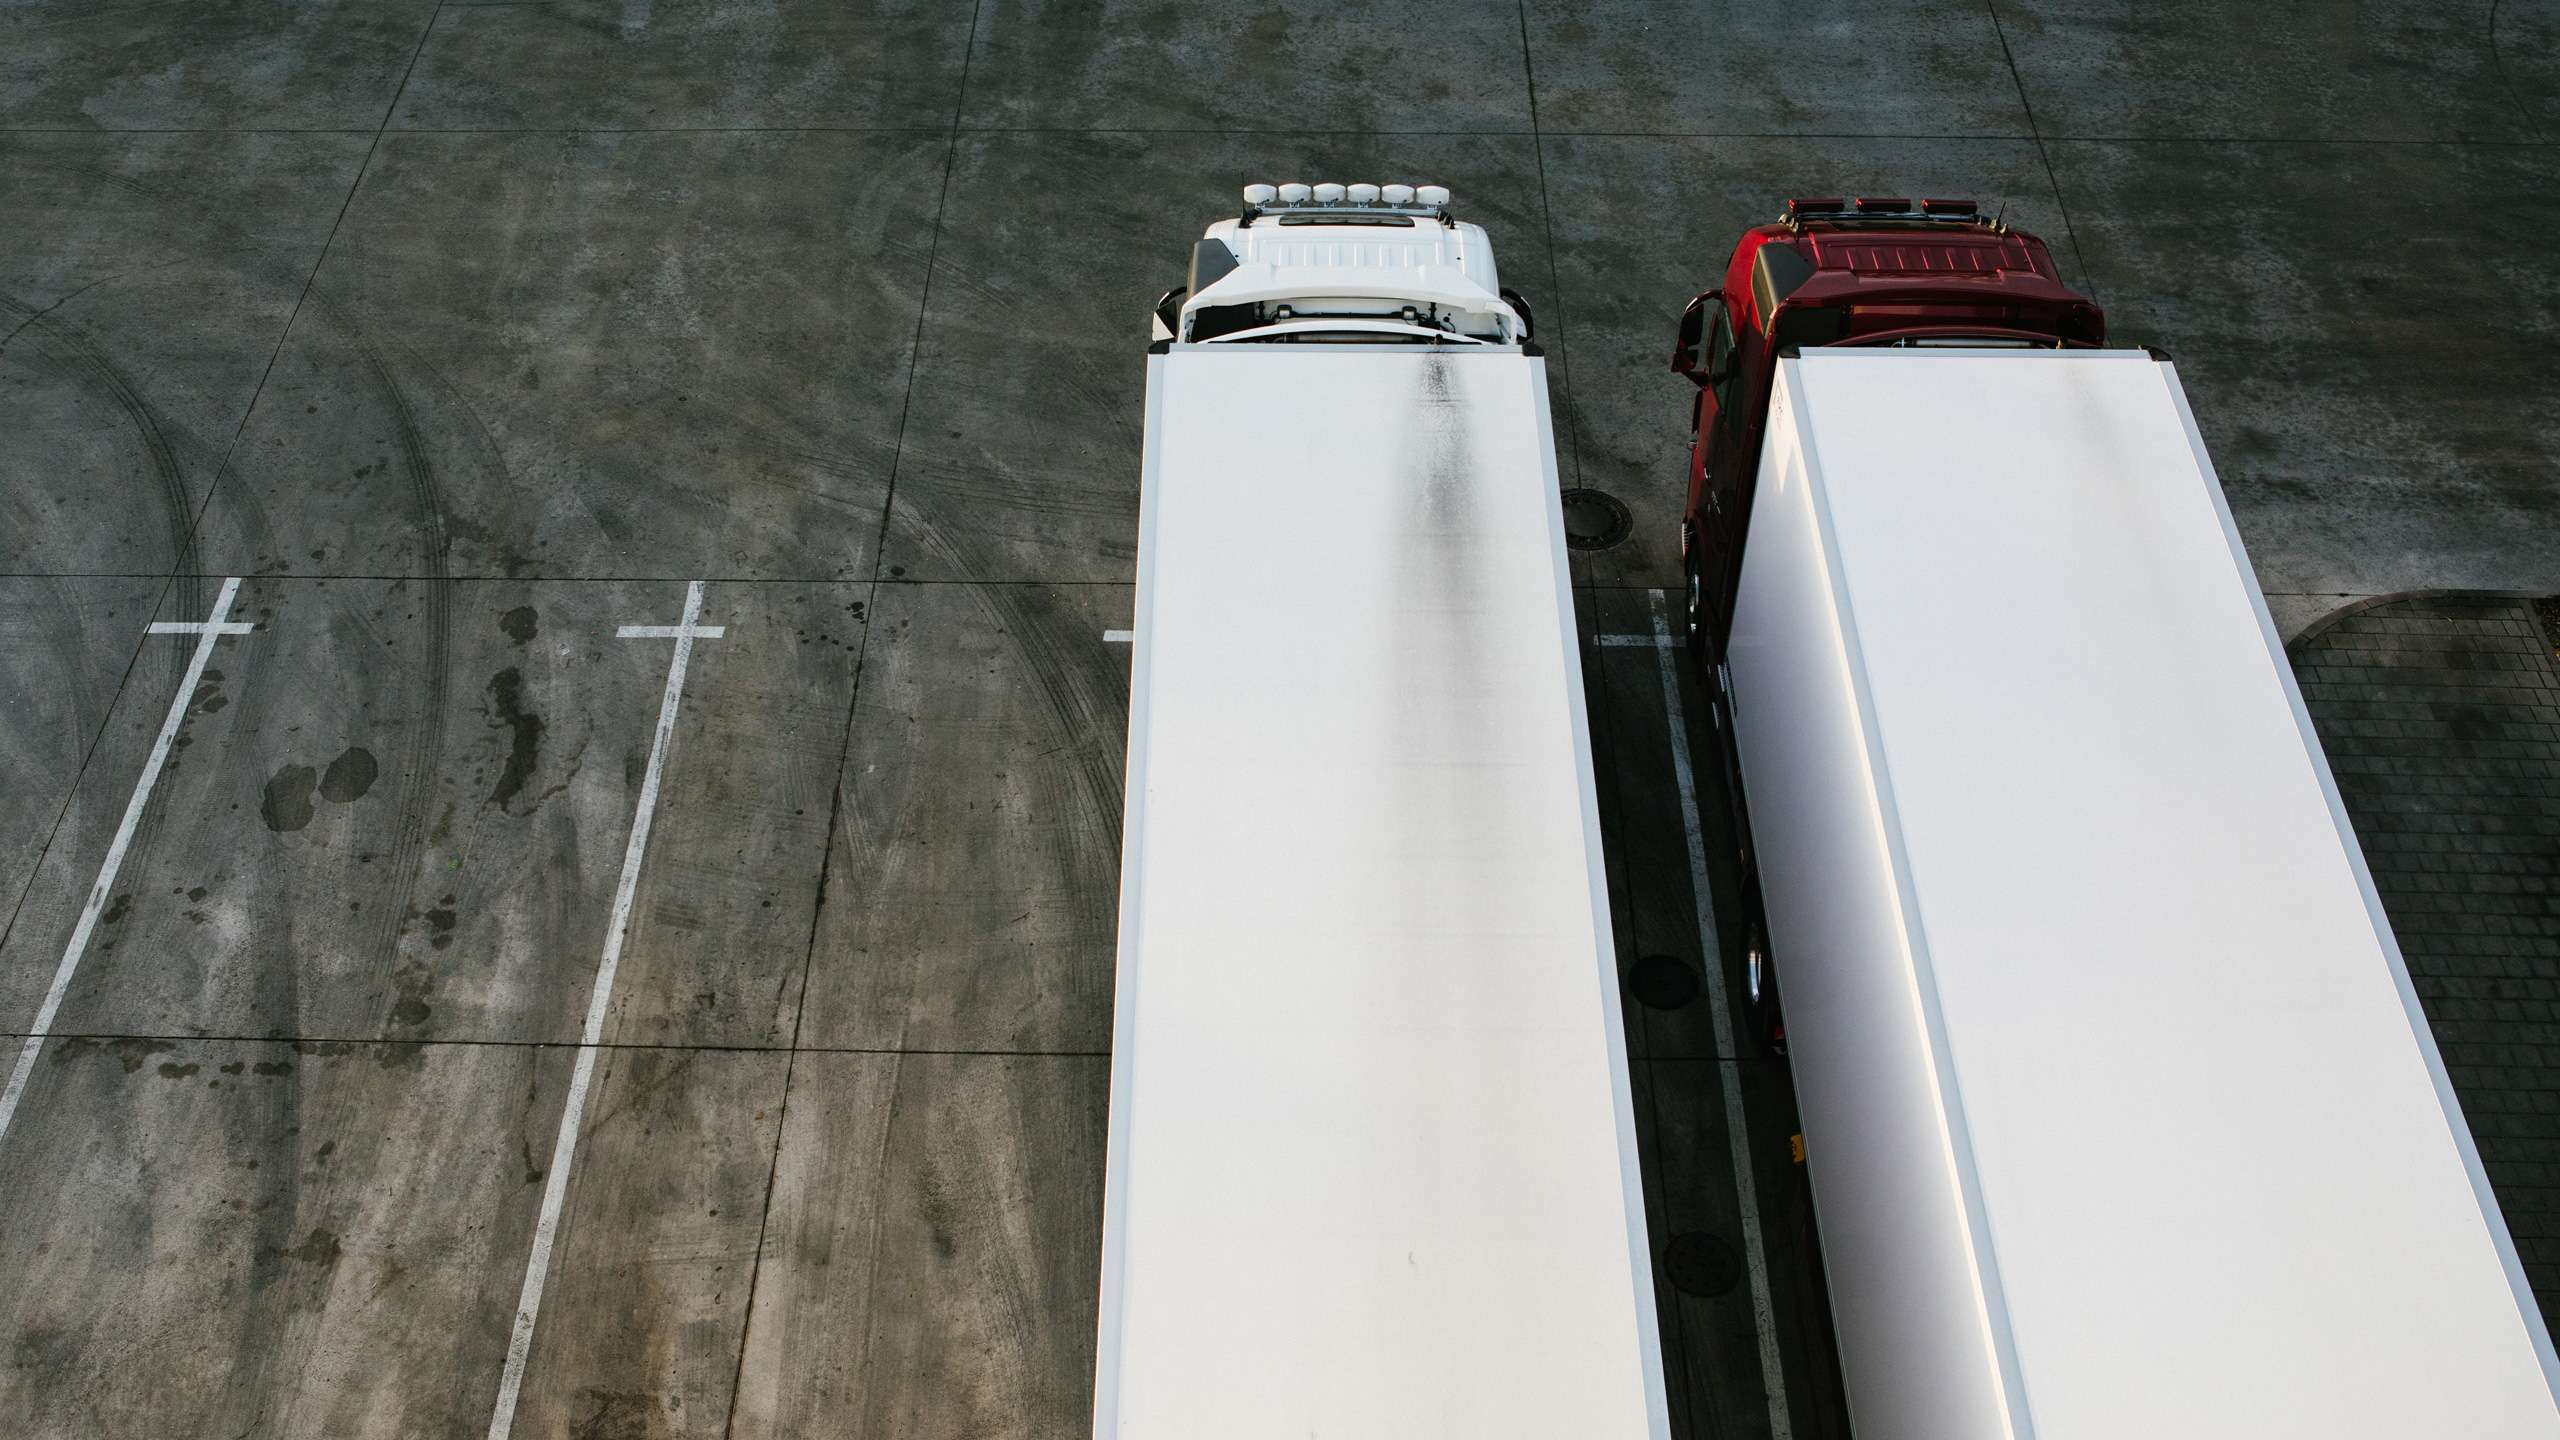 Two trucks are standing next to each other in a truck park, seen from above. The one on the left is completely white, the one on the the right has a shiny red cab.